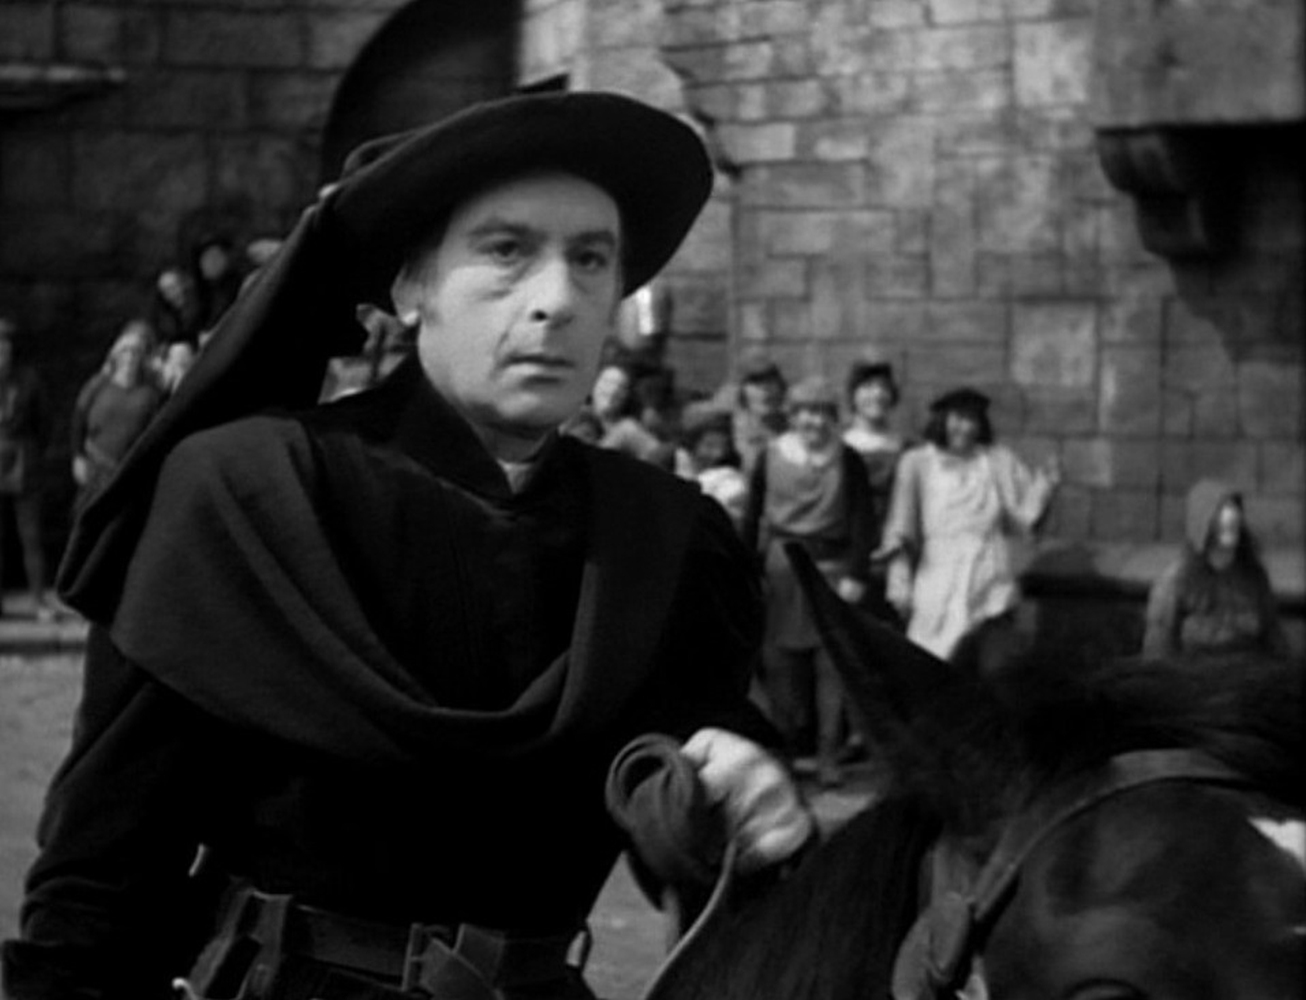 A Sir Cedric Hardwicke costume from The Hunchback of Notre Dame - Image 7 of 7